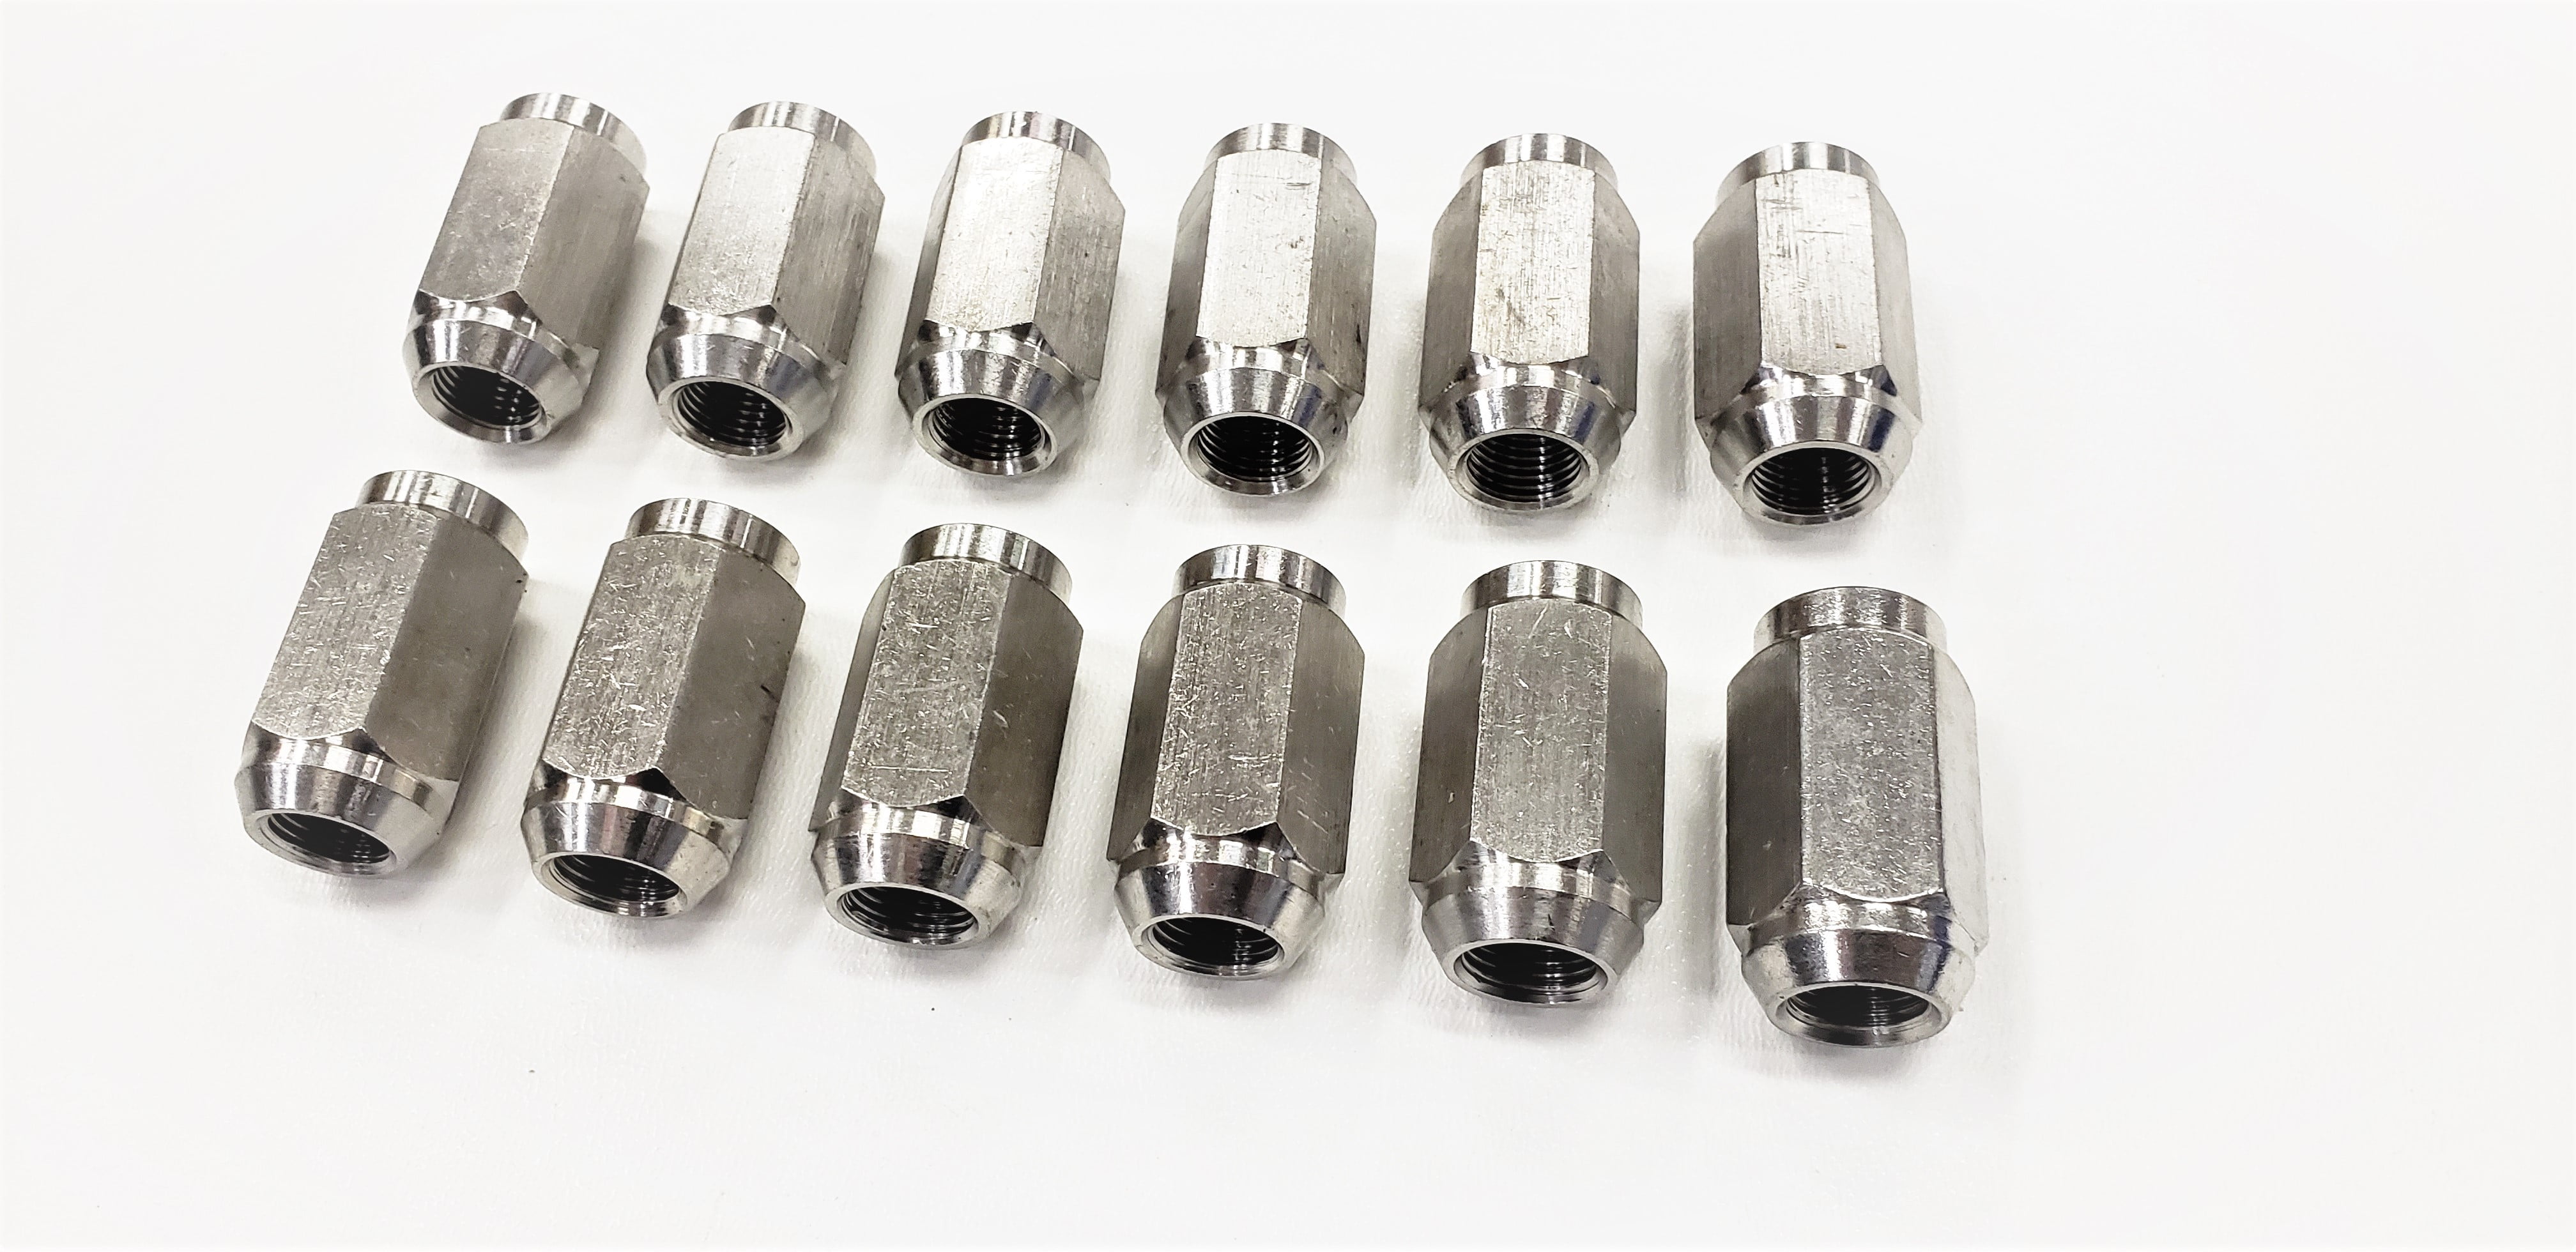 BOAT TRAILER STAINLESS STEEL LUG NUTS 1/2-20 SET OF 36 LUGS 004258 OPEN END S/S 